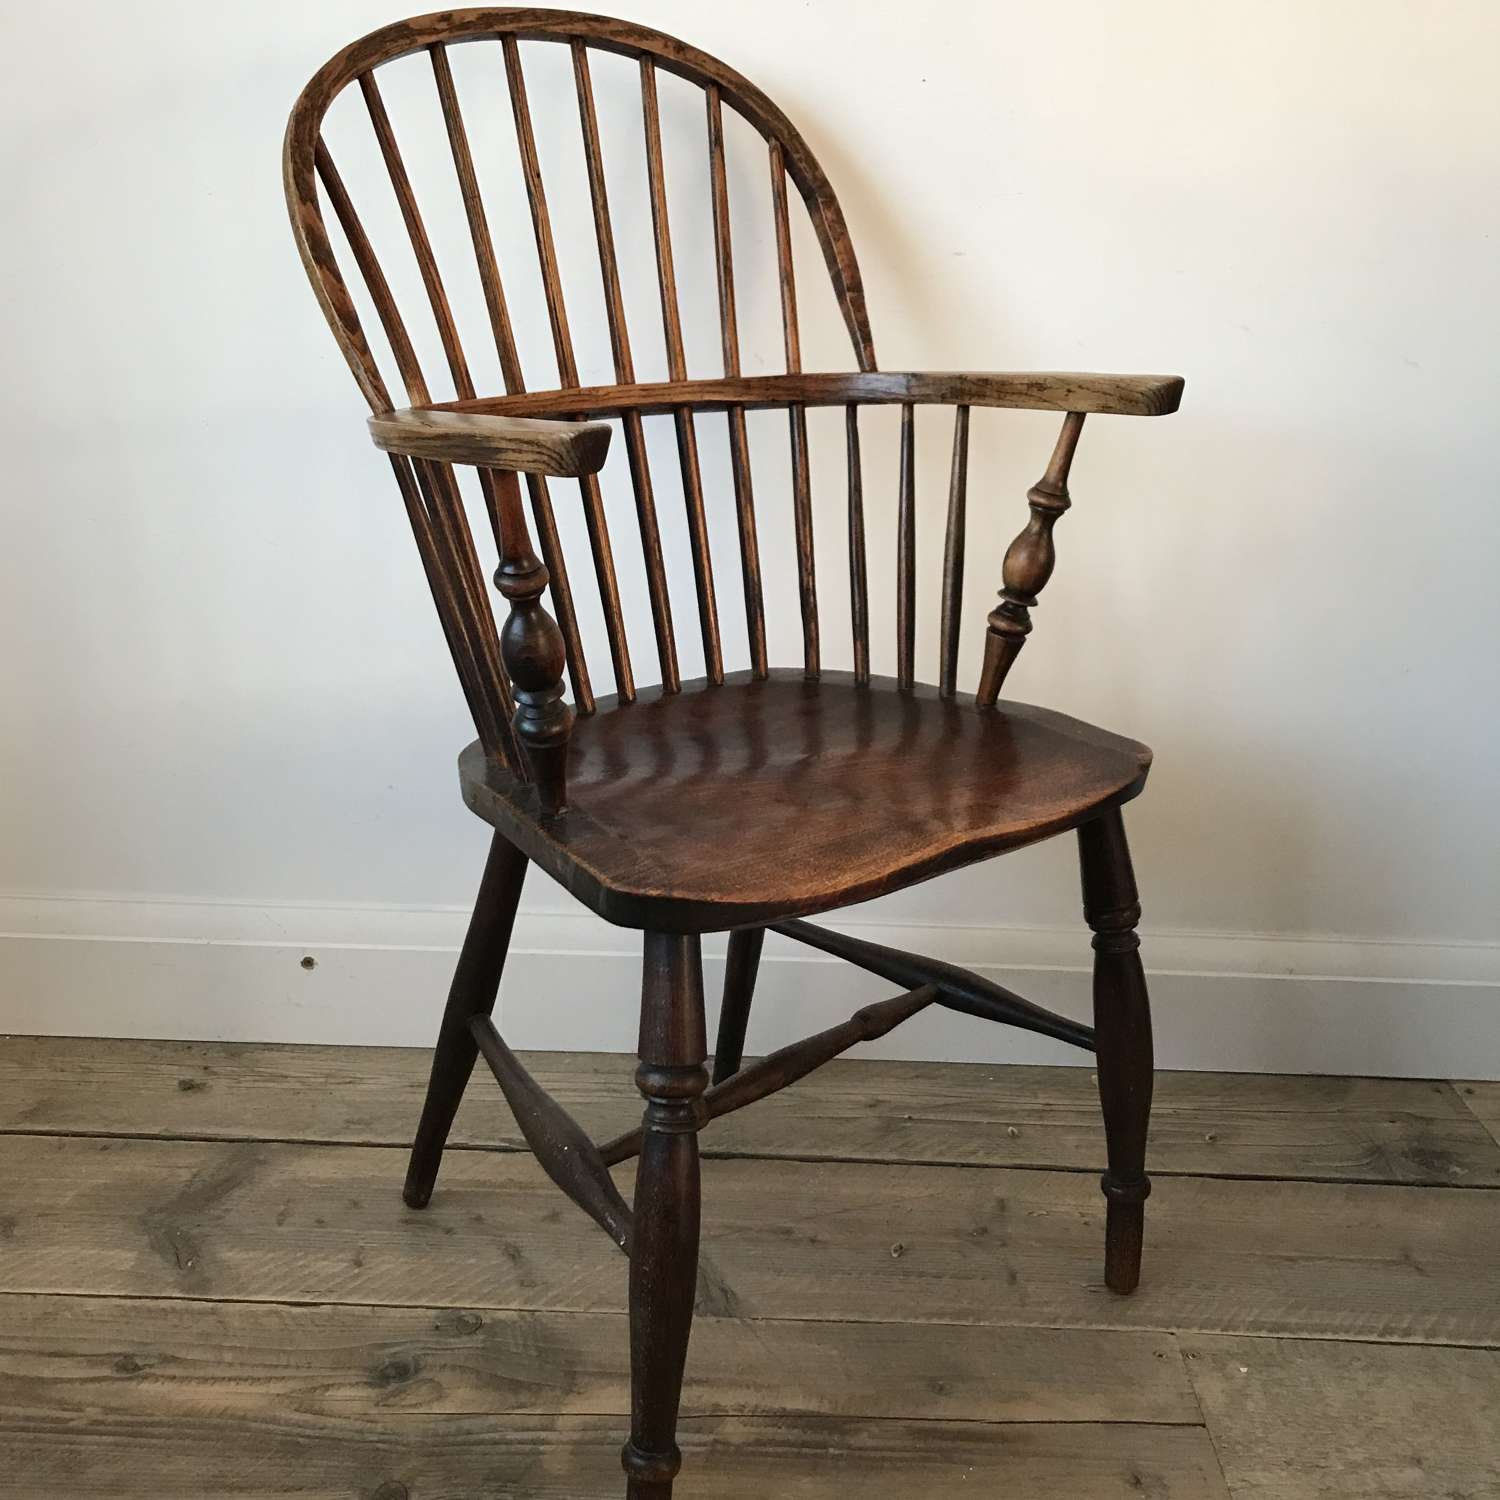 Hoop back Windsor chair. Circa 1800 attributed to Taylor of Grantham